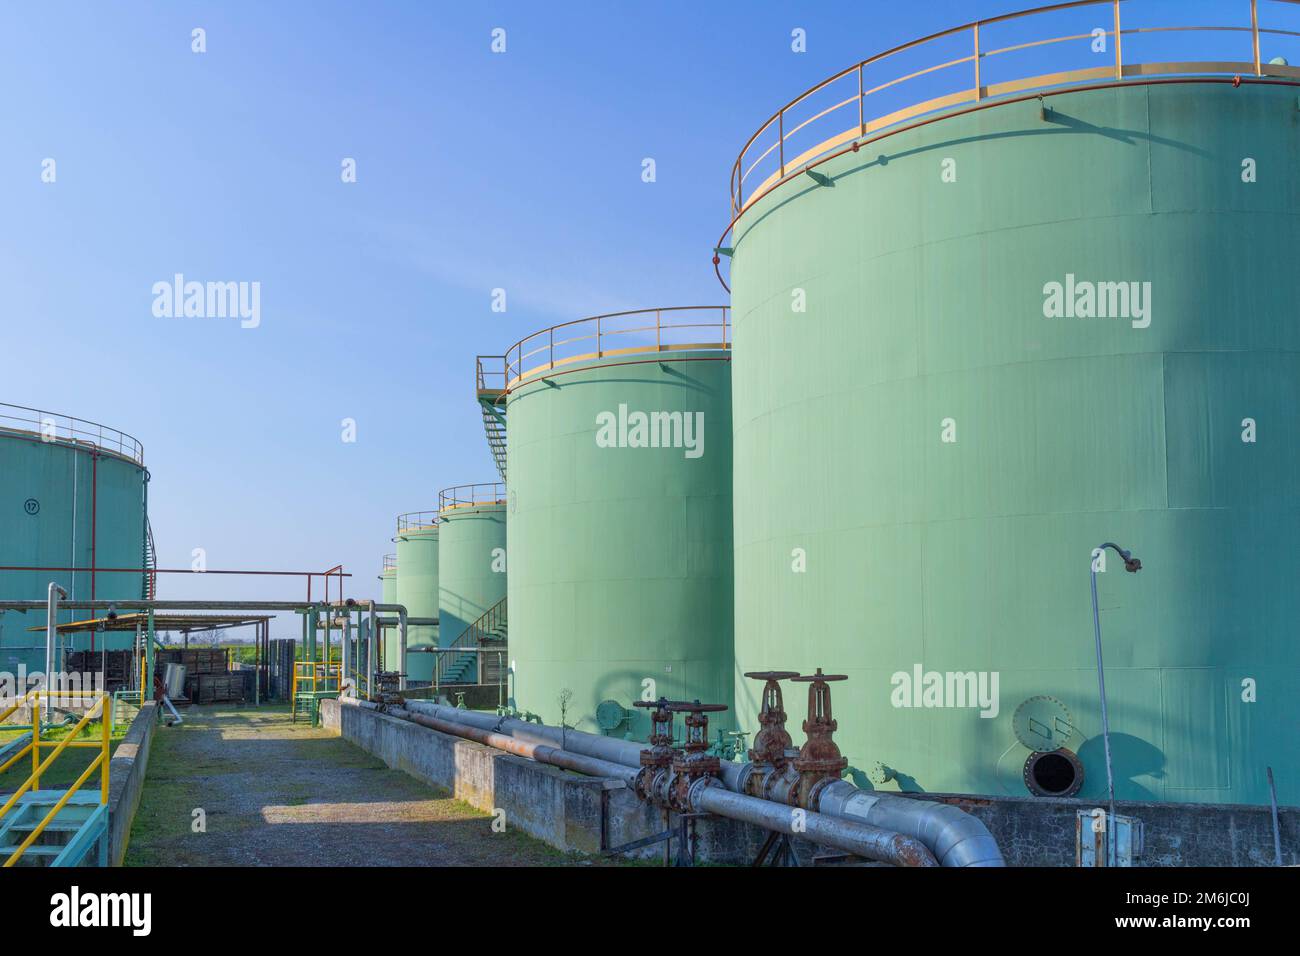 View of storage tank and pipes of chemical industry, Italy Stock Photo